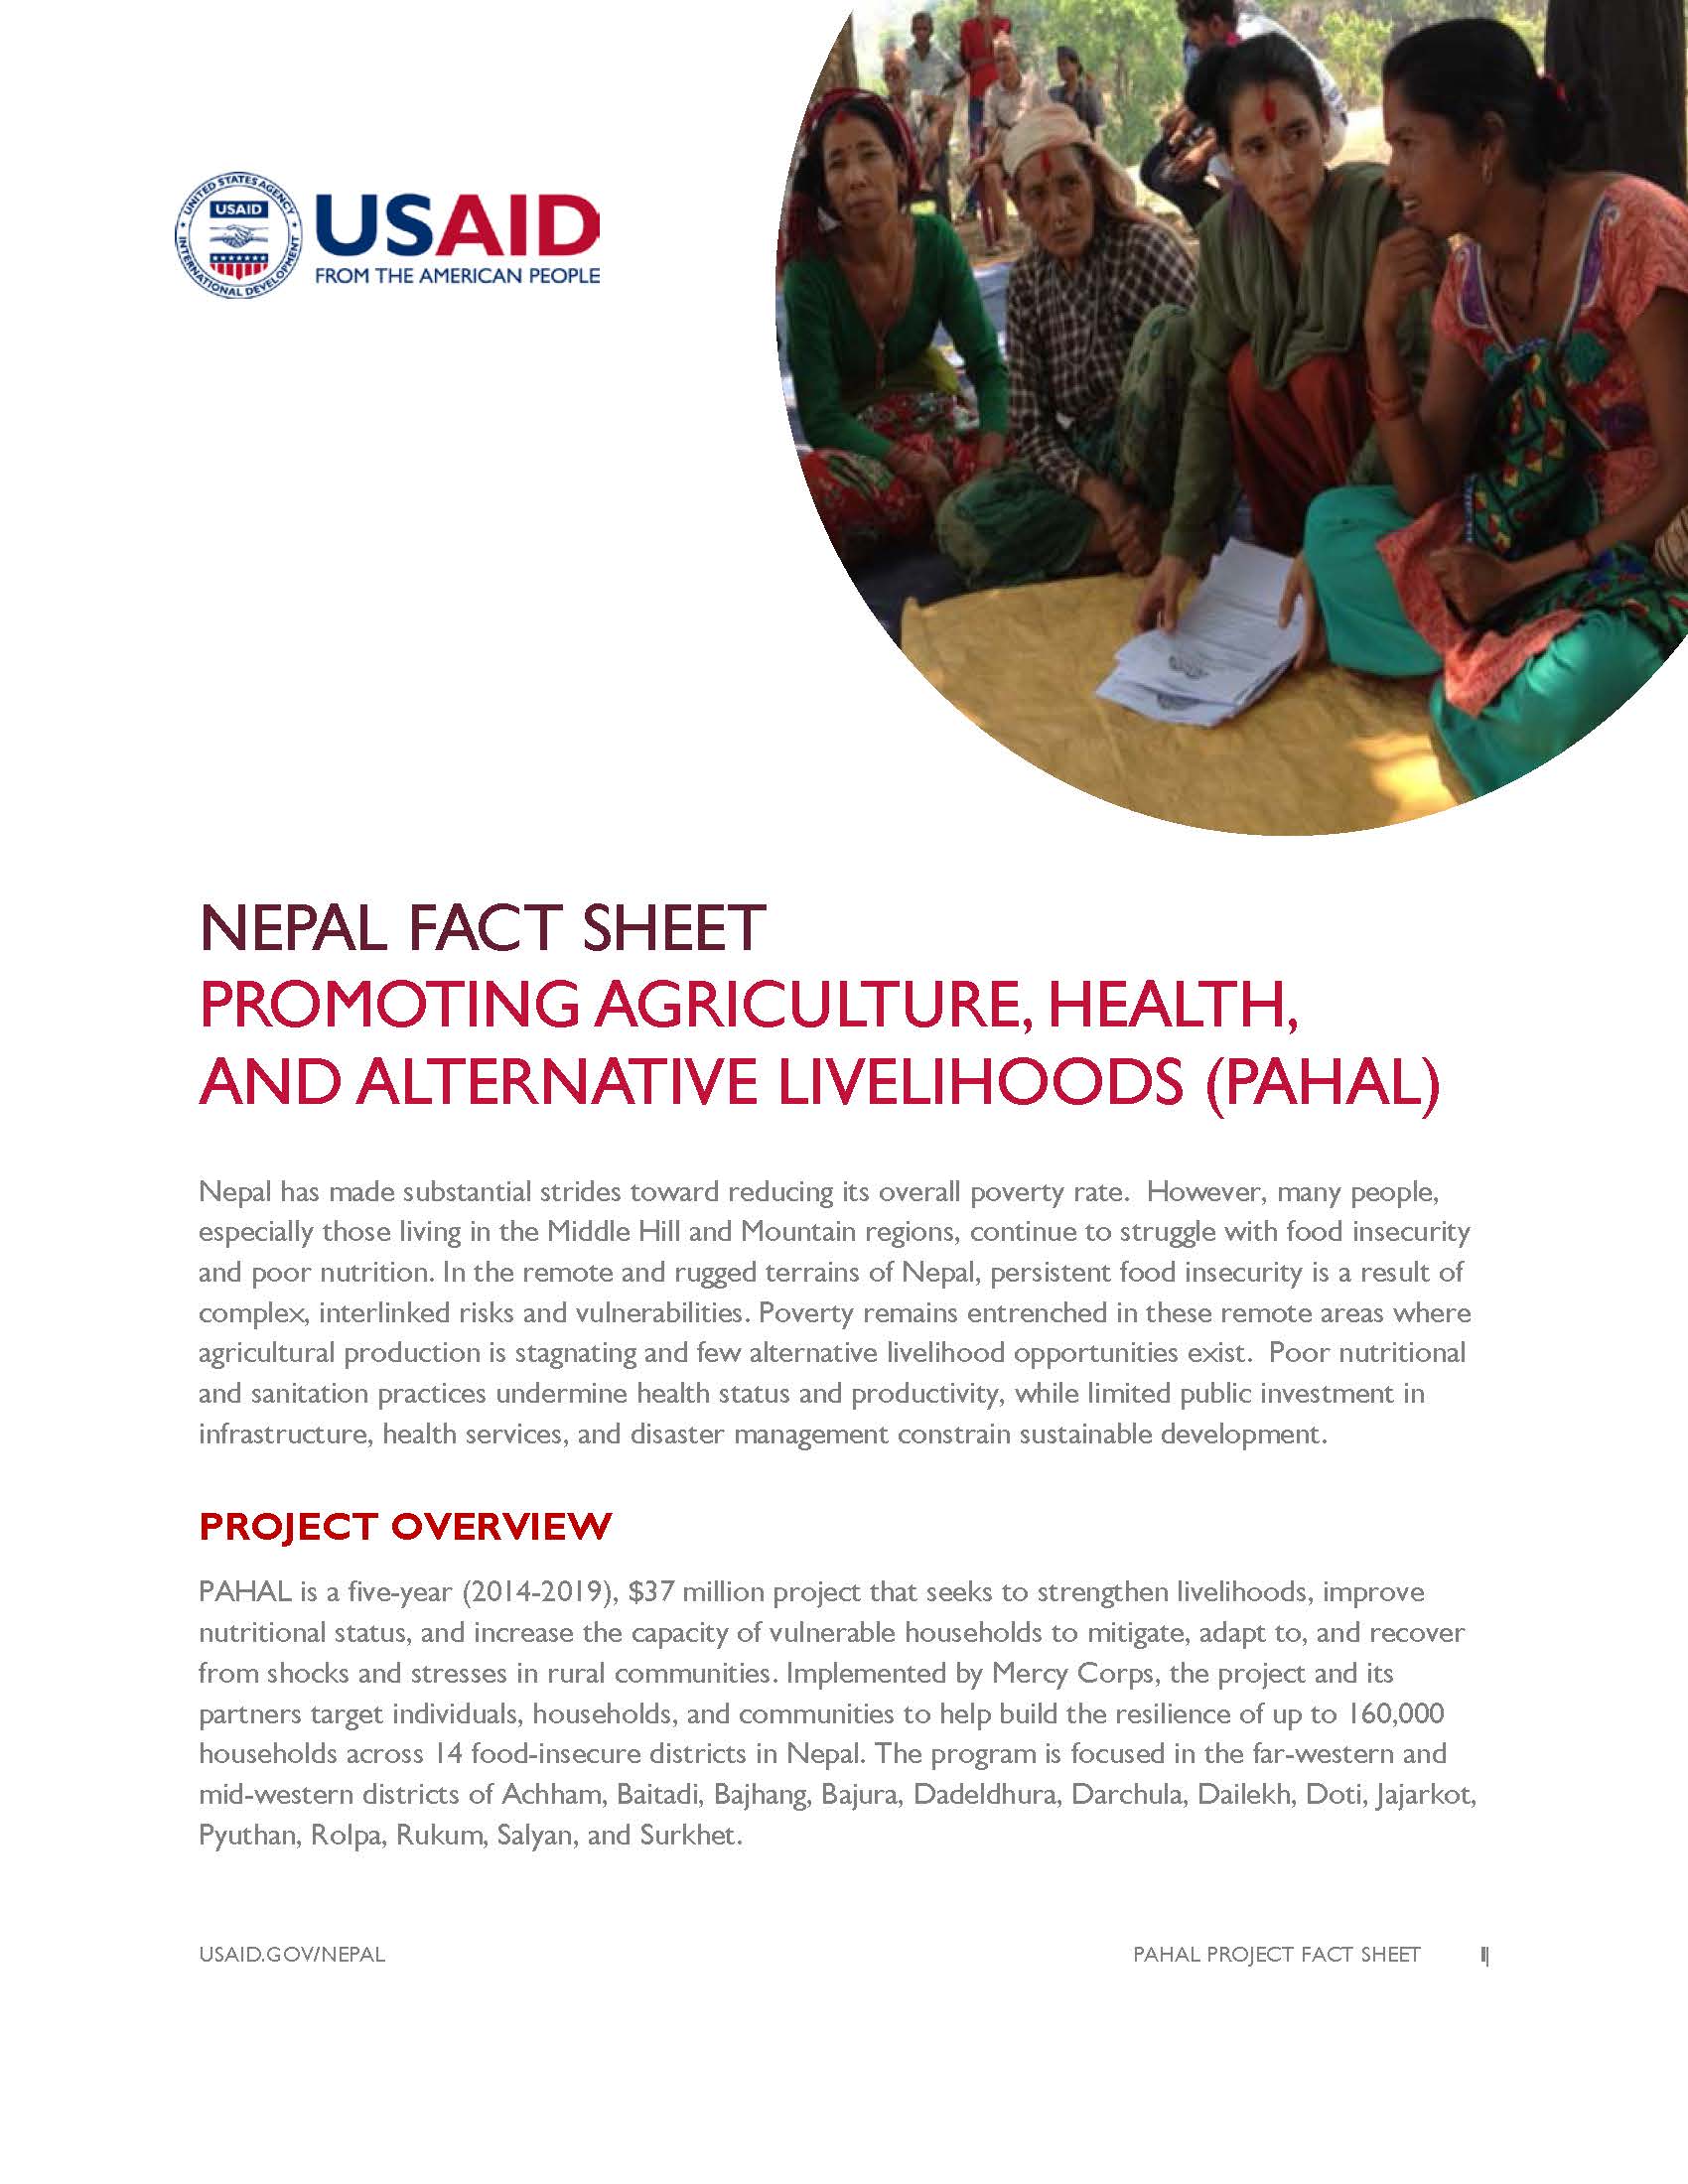 FACTSHEET: PROMOTING AGRICULTURE, HEALTH, AND ALTERNATIVE LIVELIHOODS (PAHAL) 